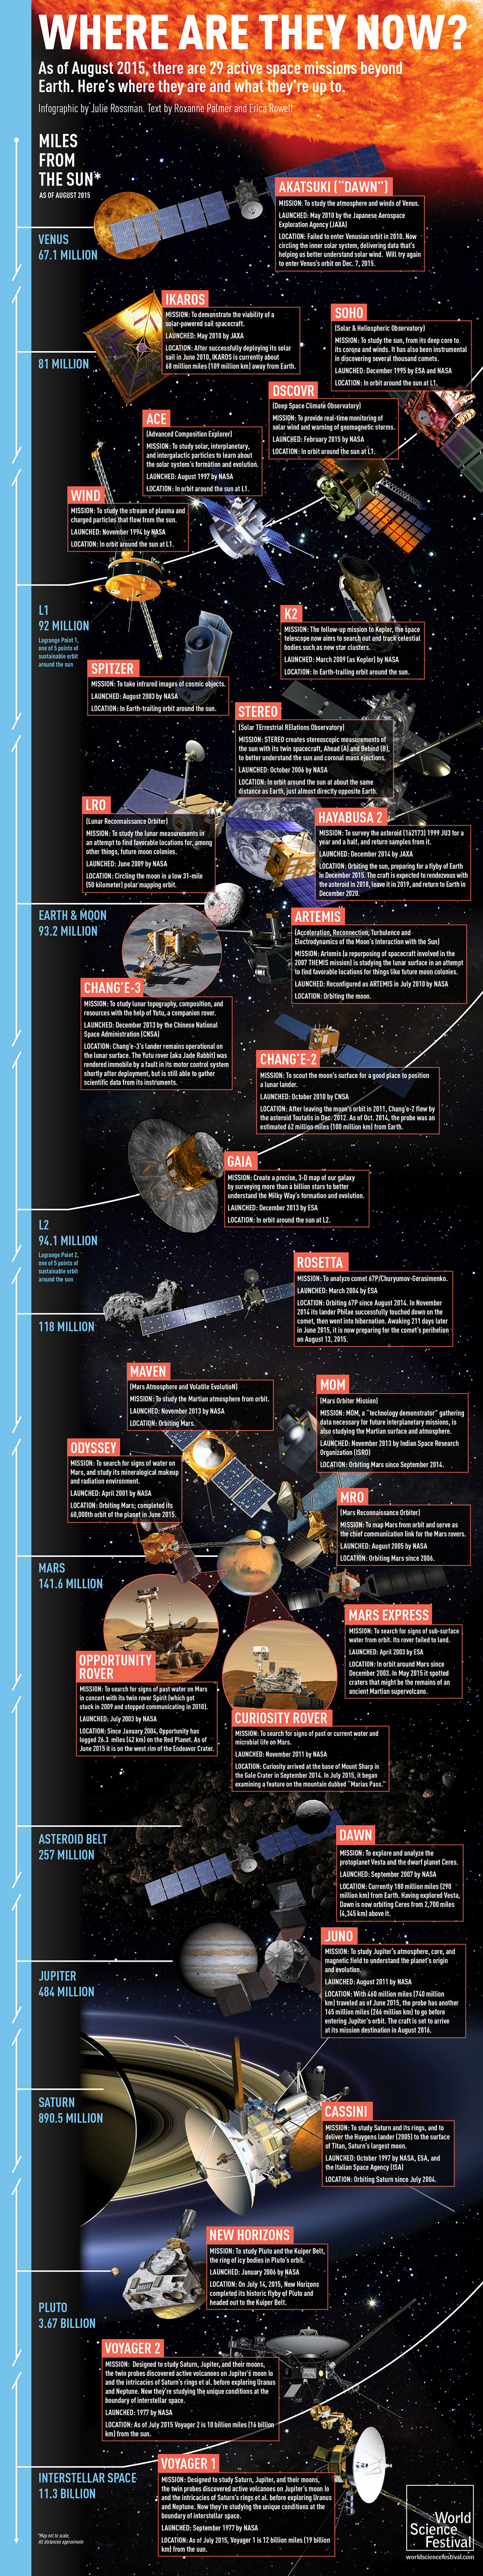 Active Space Missions Beyond Earth - Astronomy Infographic